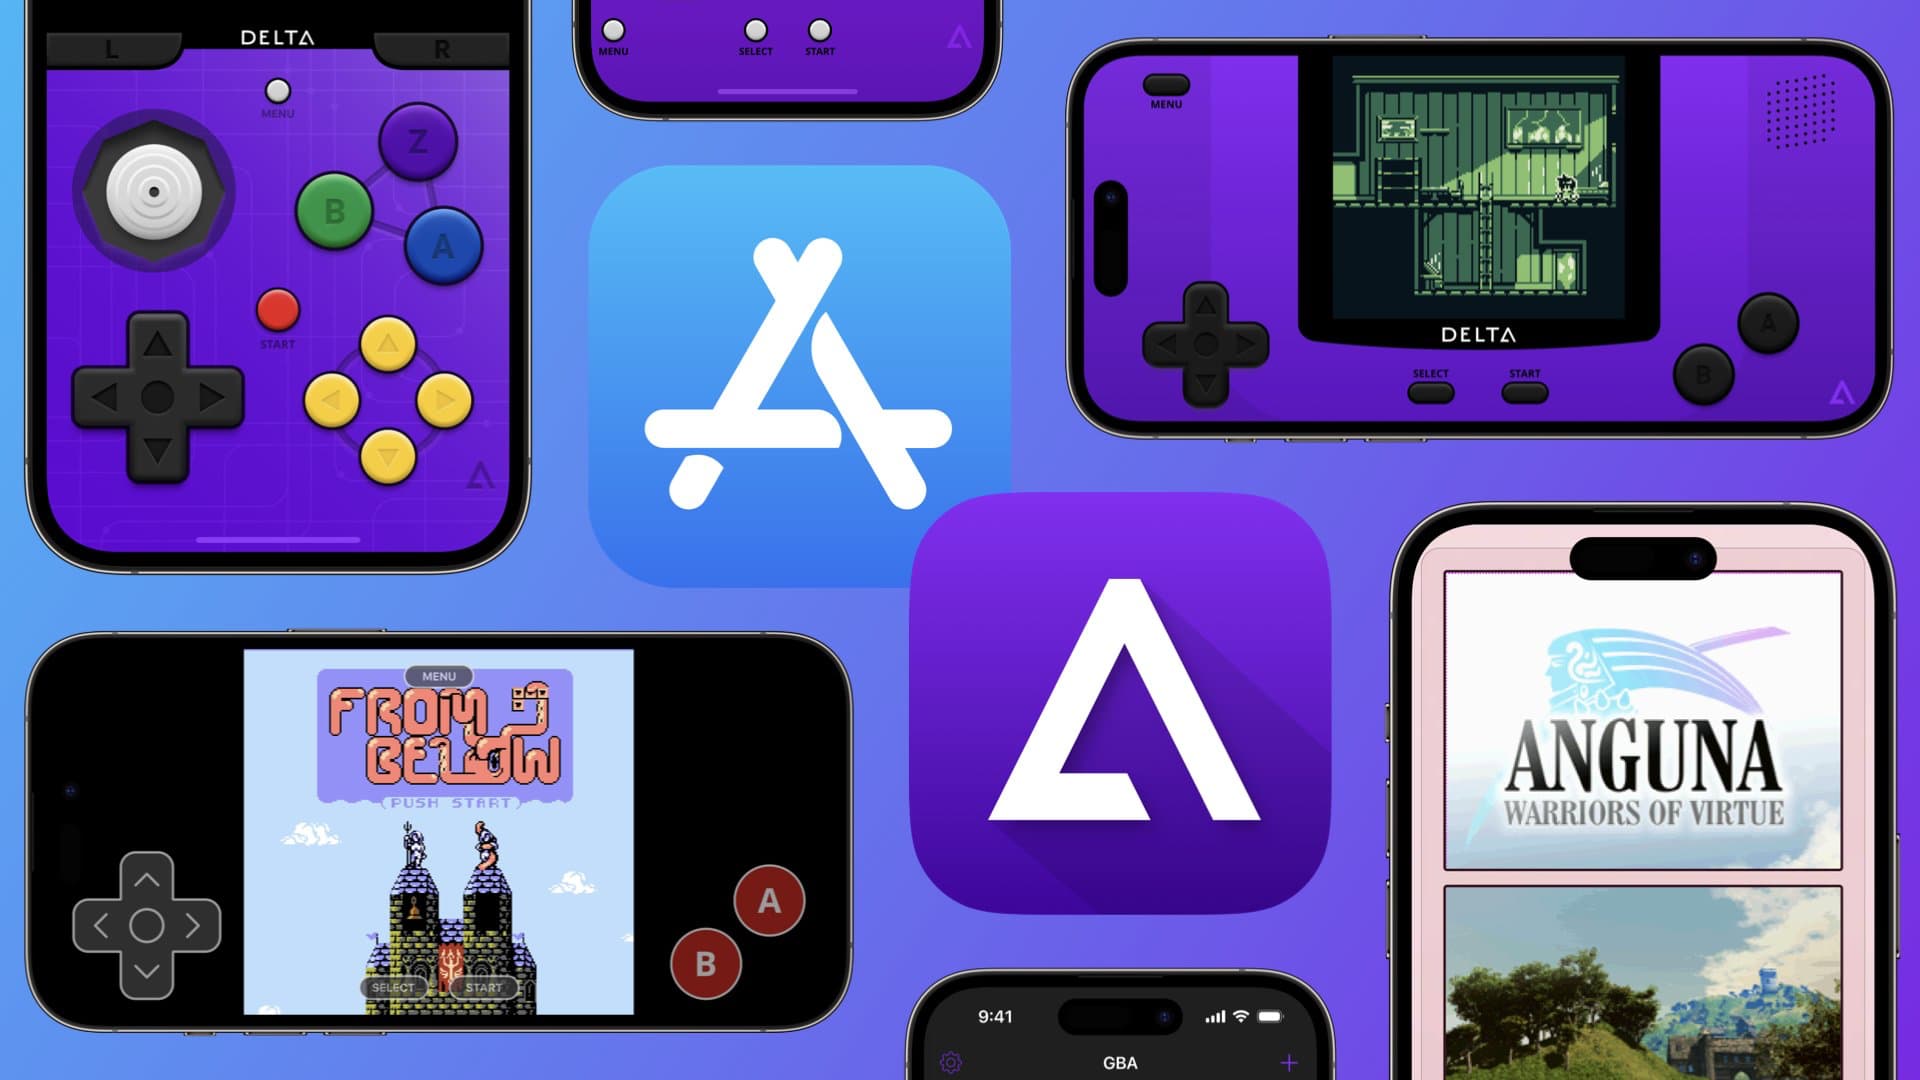 How to load game ROMs in the Delta emulator app for iPhone